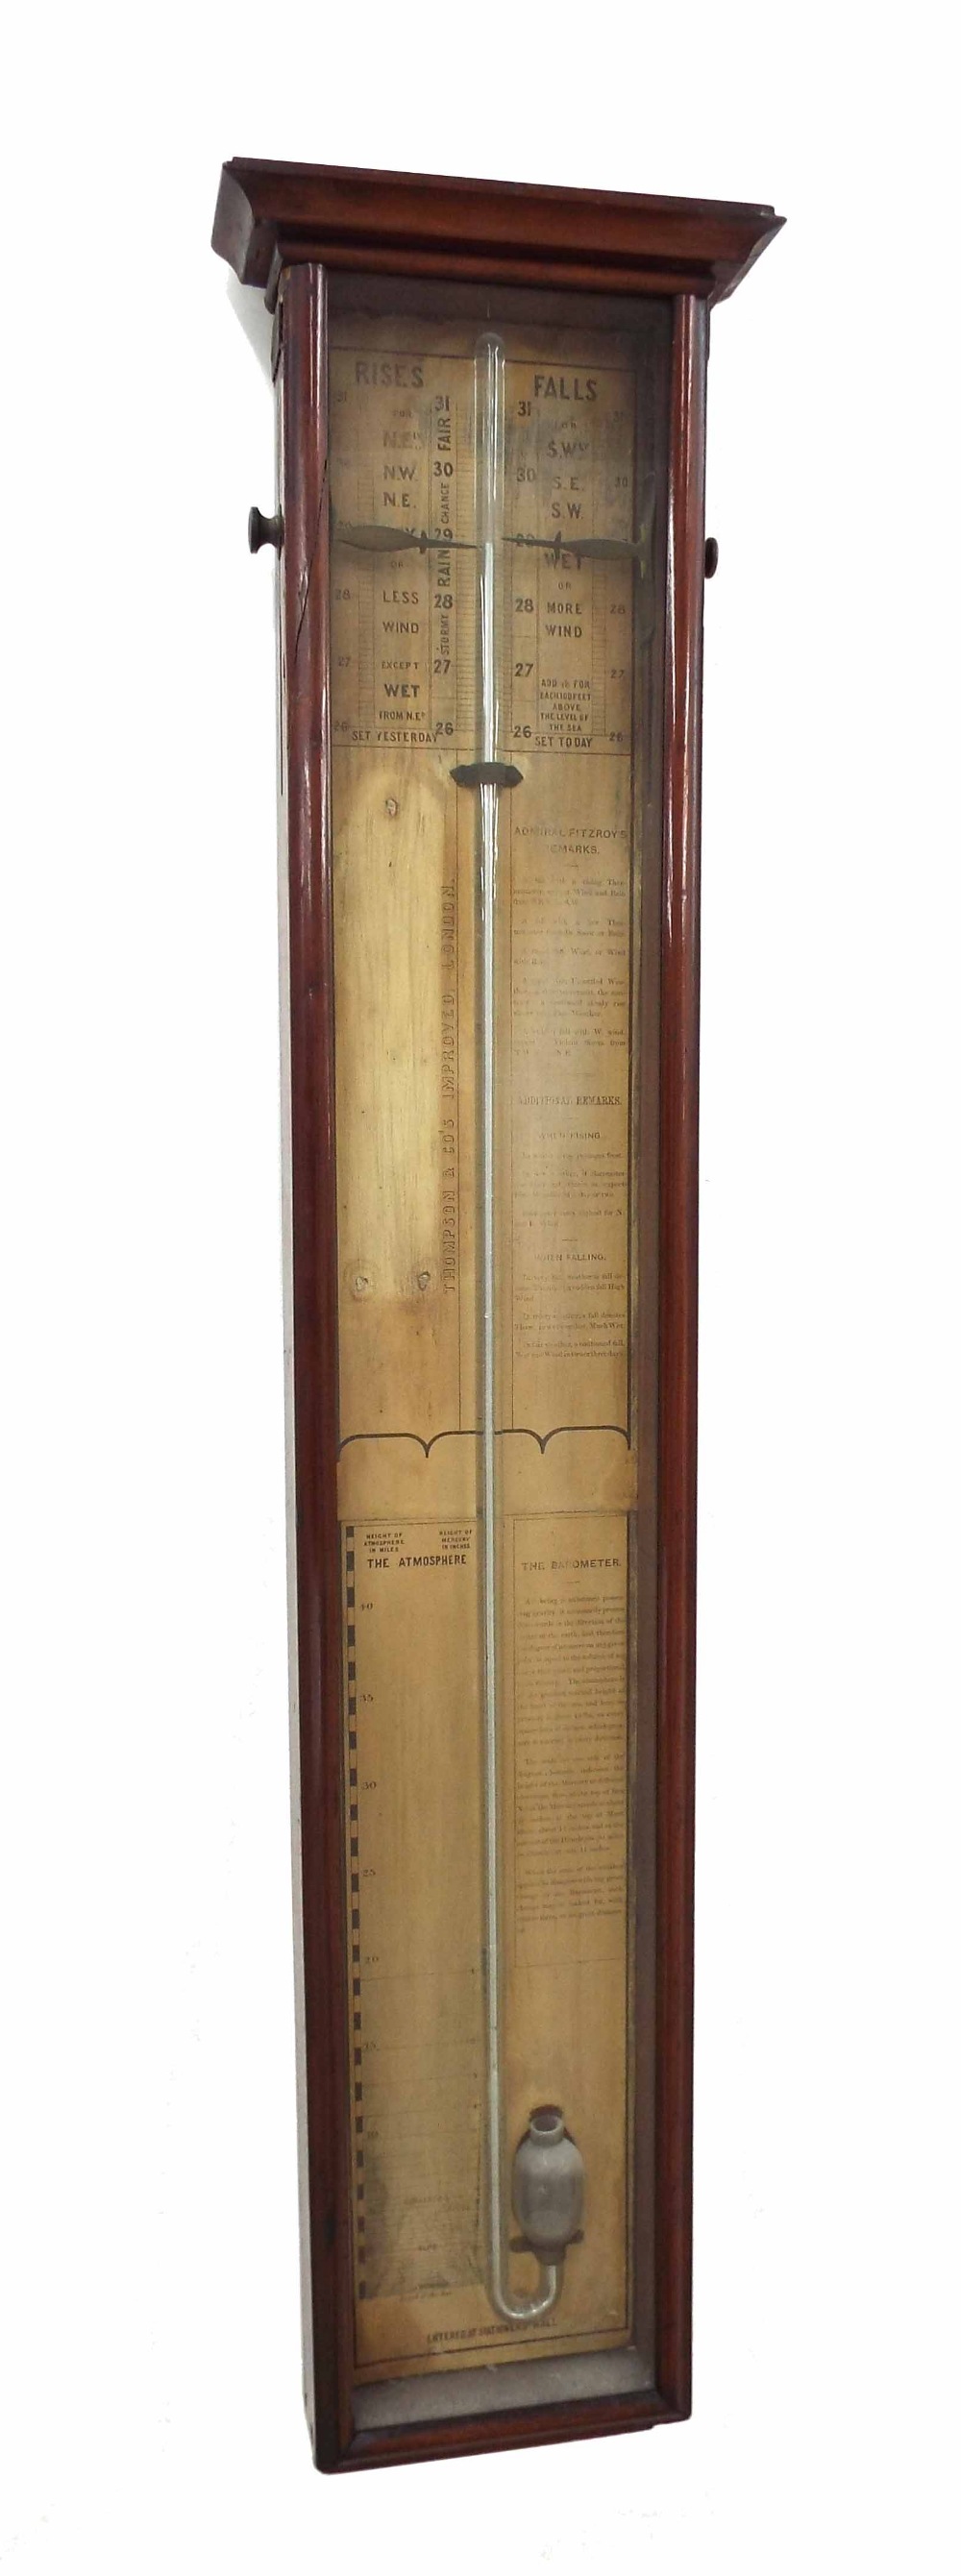 Admiral Fitzroy barometer (lacking thermometer), within a mahogany case